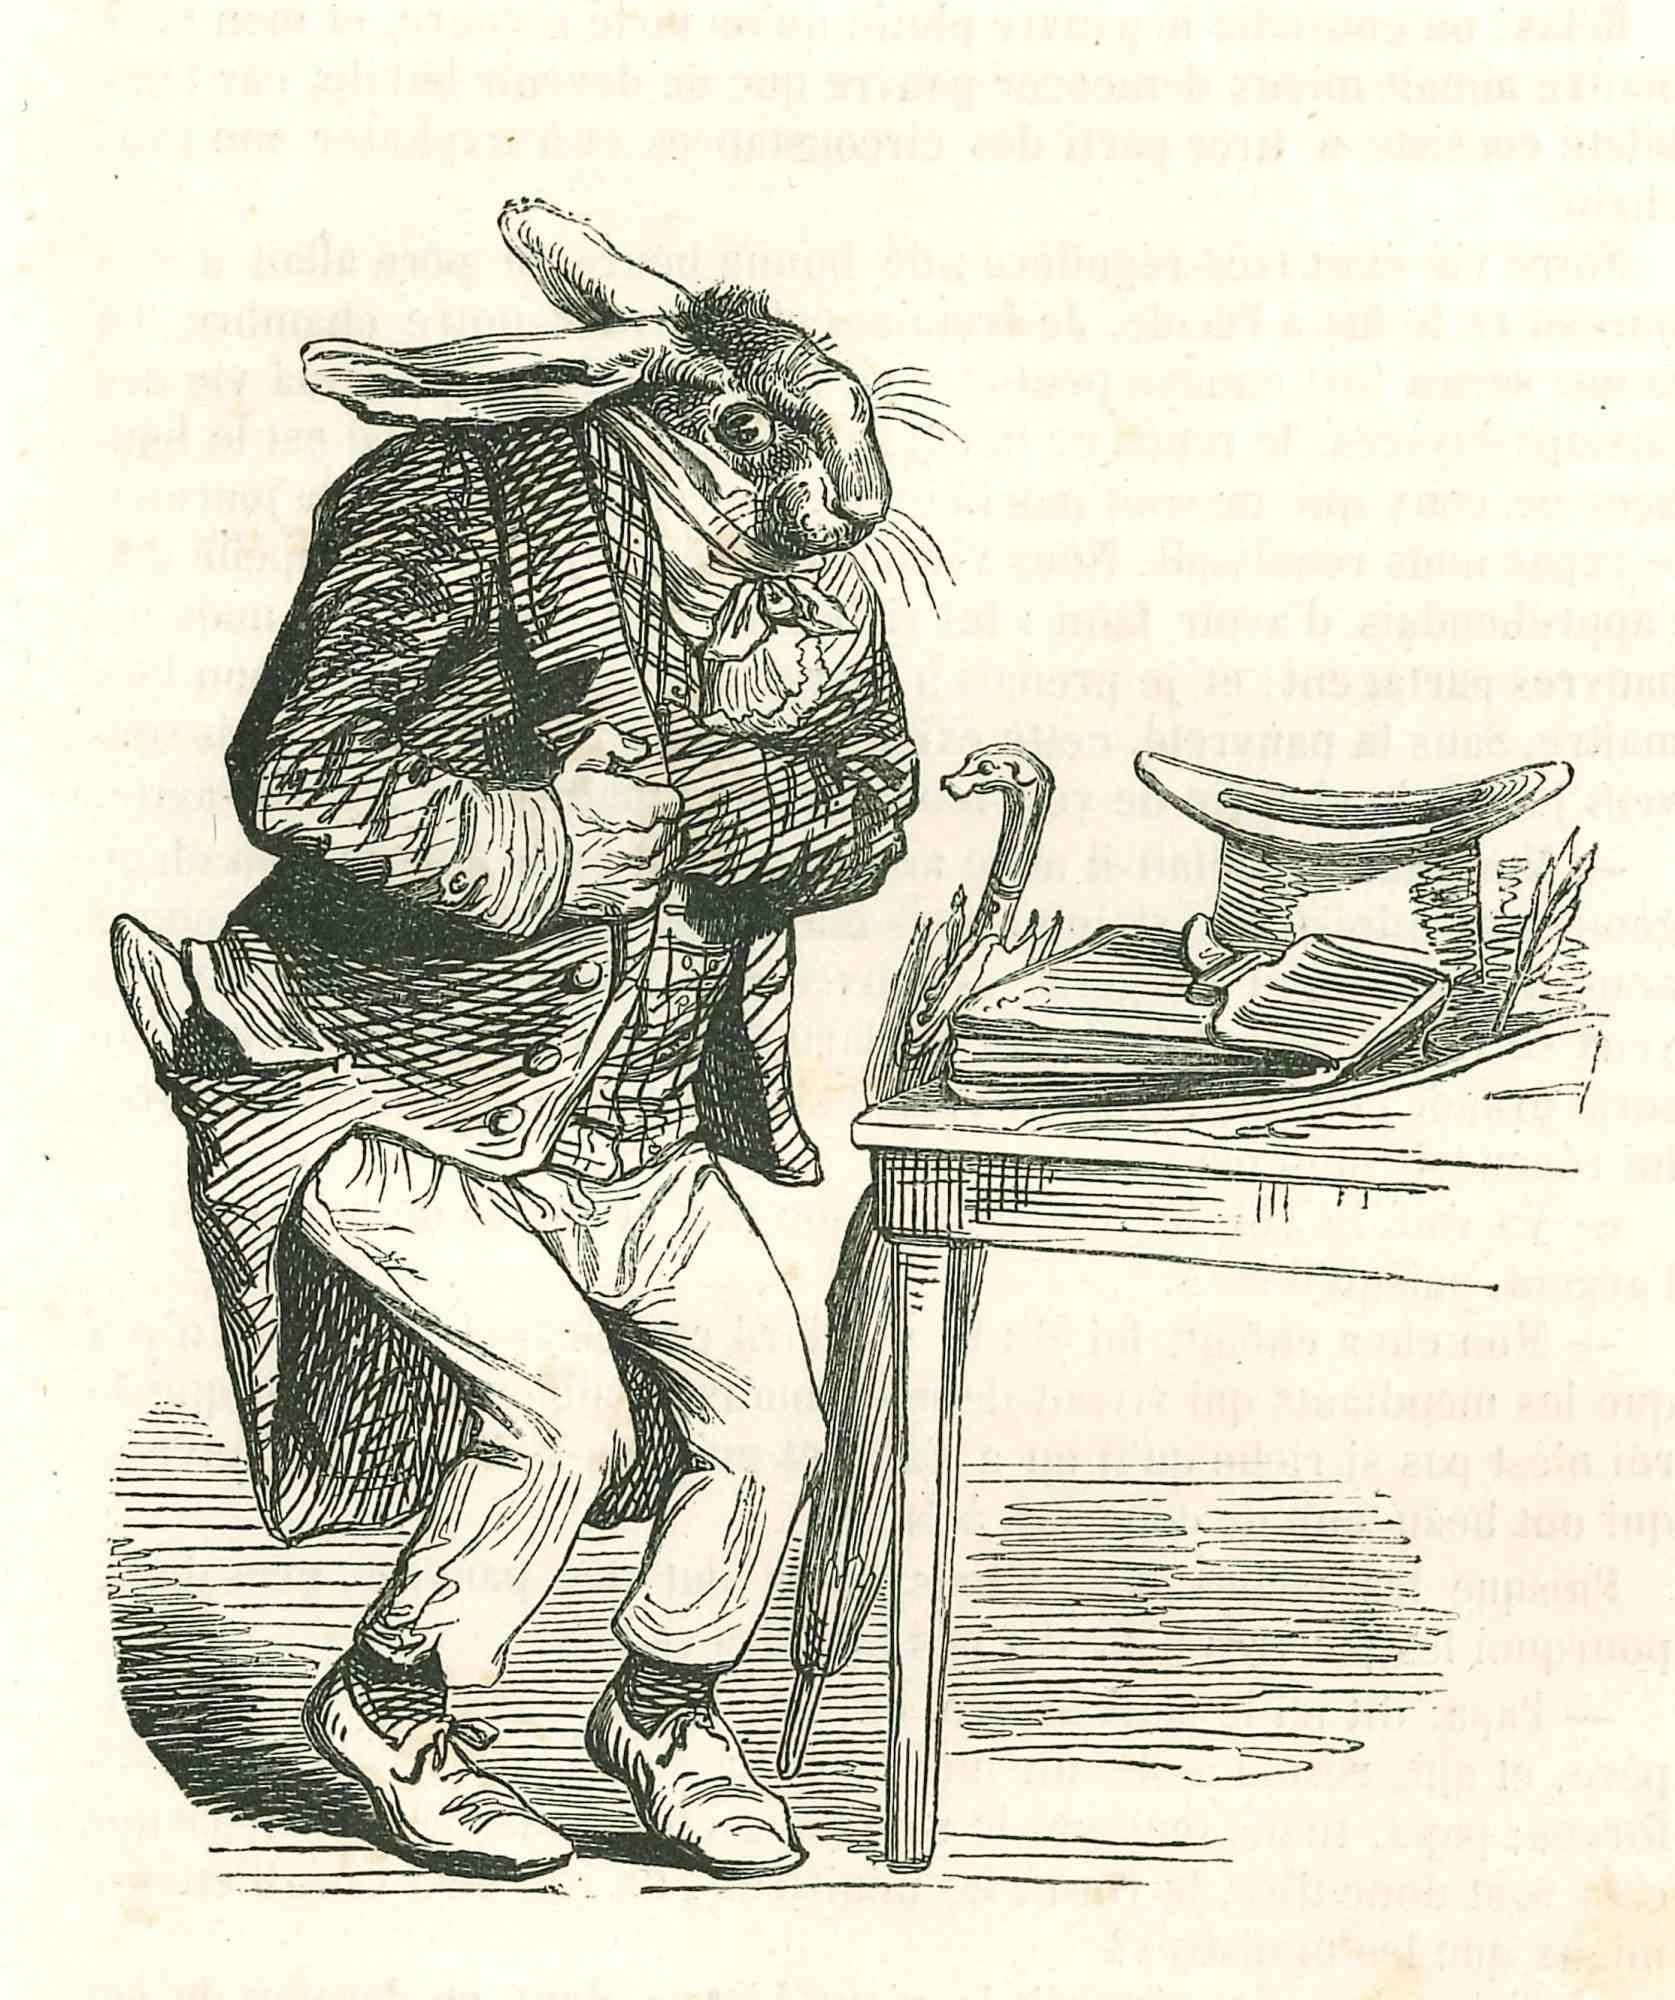 The Lawyer Bunny In A Hurry - Lithograph by J.J Grandville - 1852